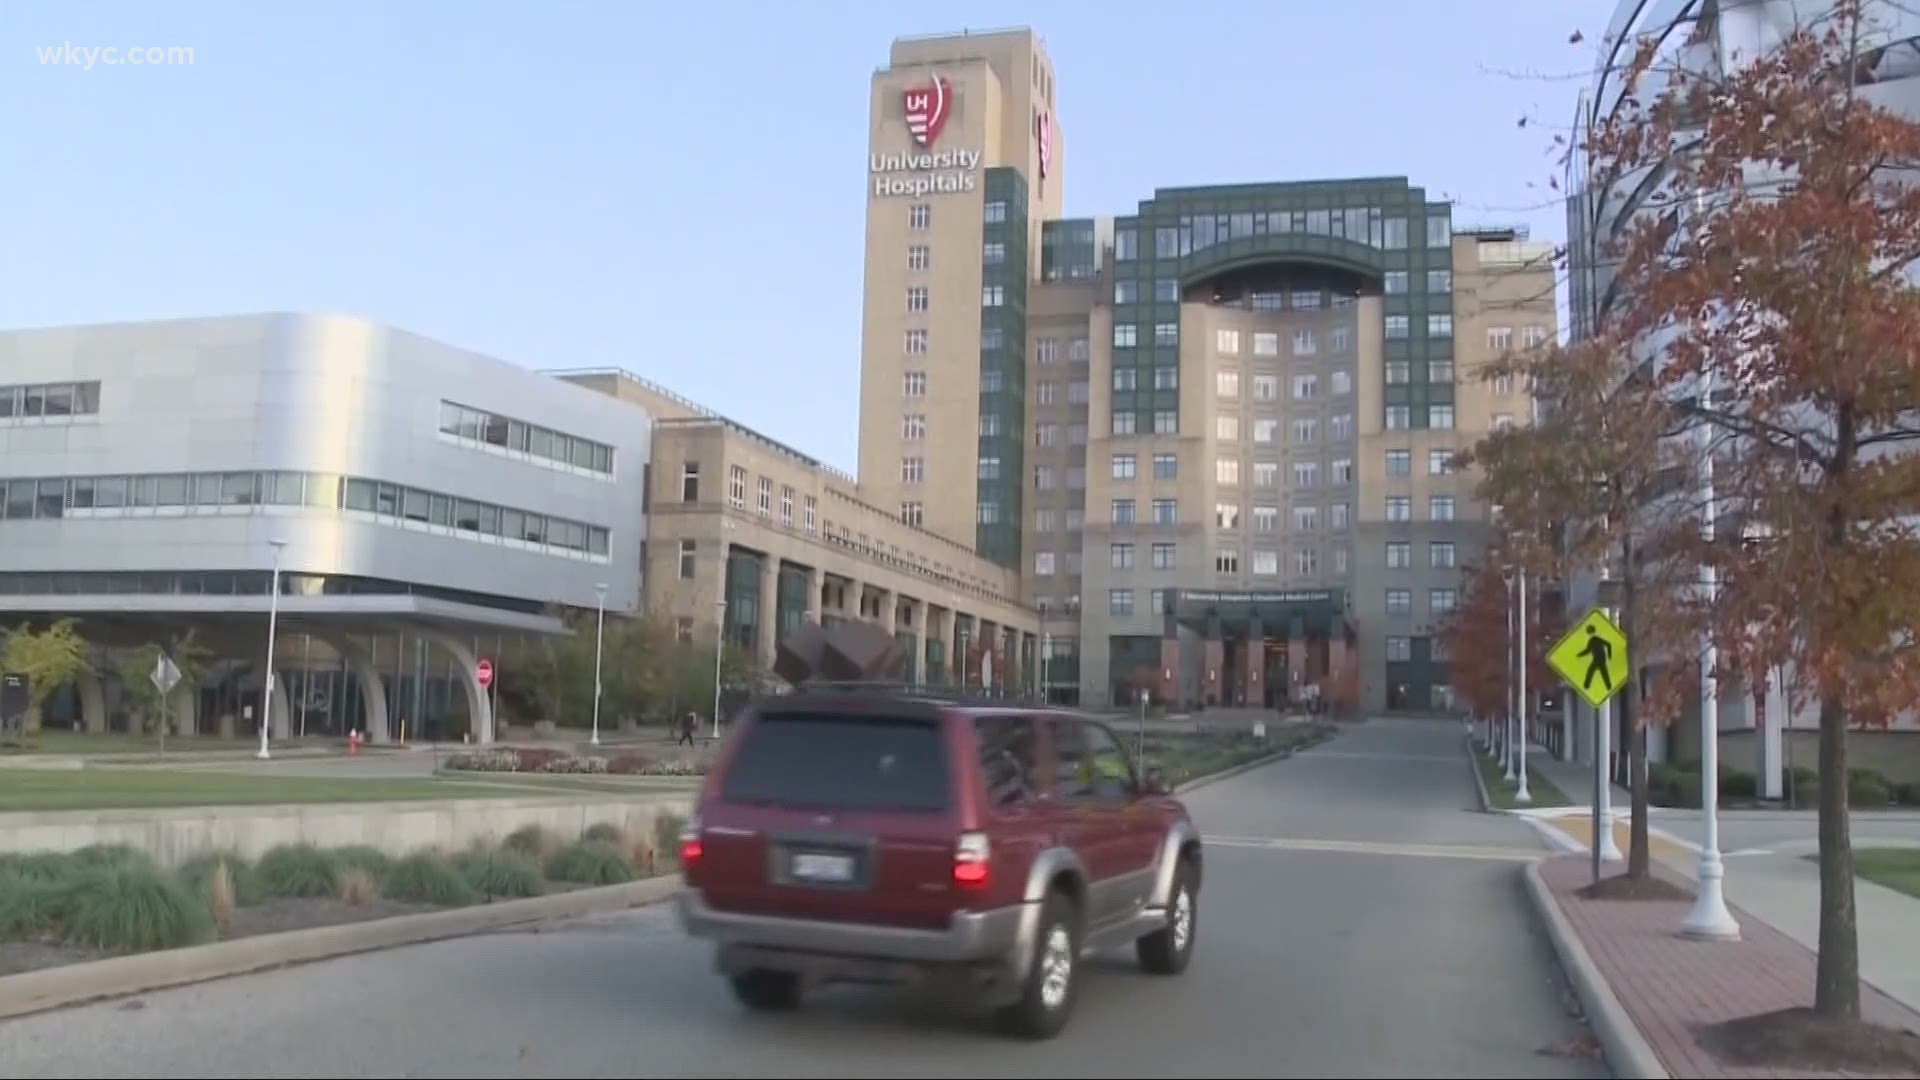 The state has seen a 200% increase in hospitalized COVID-19 patients in the last 30 days. Laura Caso reports.